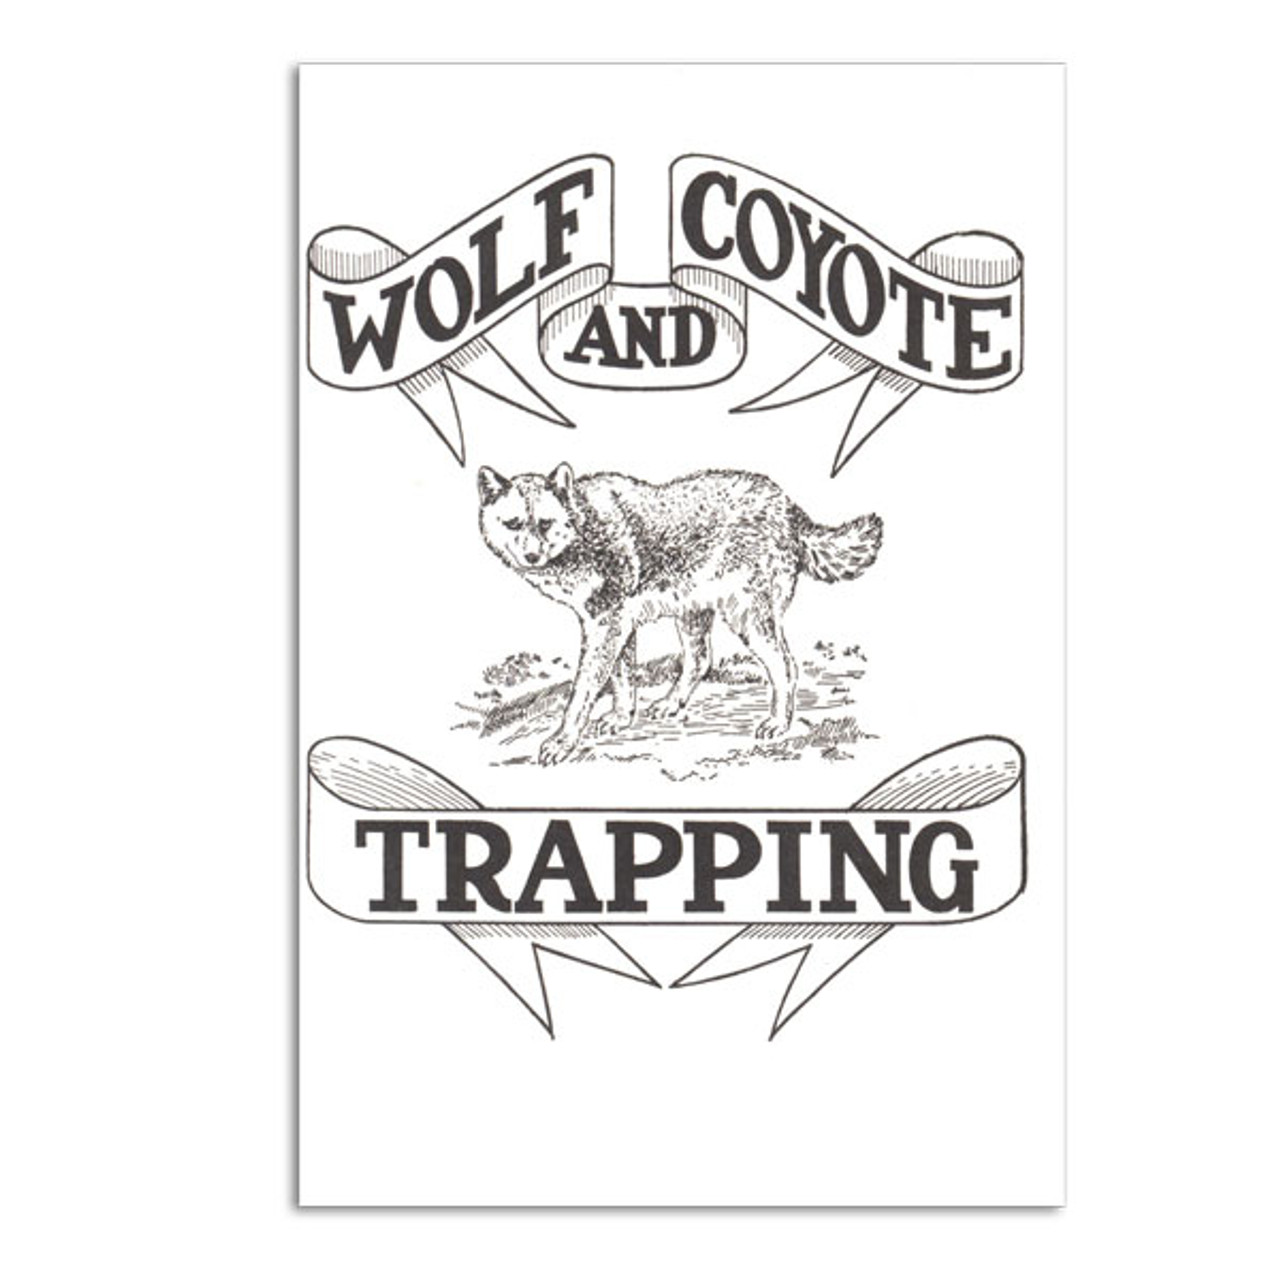 https://cdn11.bigcommerce.com/s-tnm9d2/images/stencil/1280x1280/products/252/1985/Hardings_Pleasure_and_Profit_Books_Wolf_and_Coyote_Trapping_10__74098.1569245038.jpg?c=2